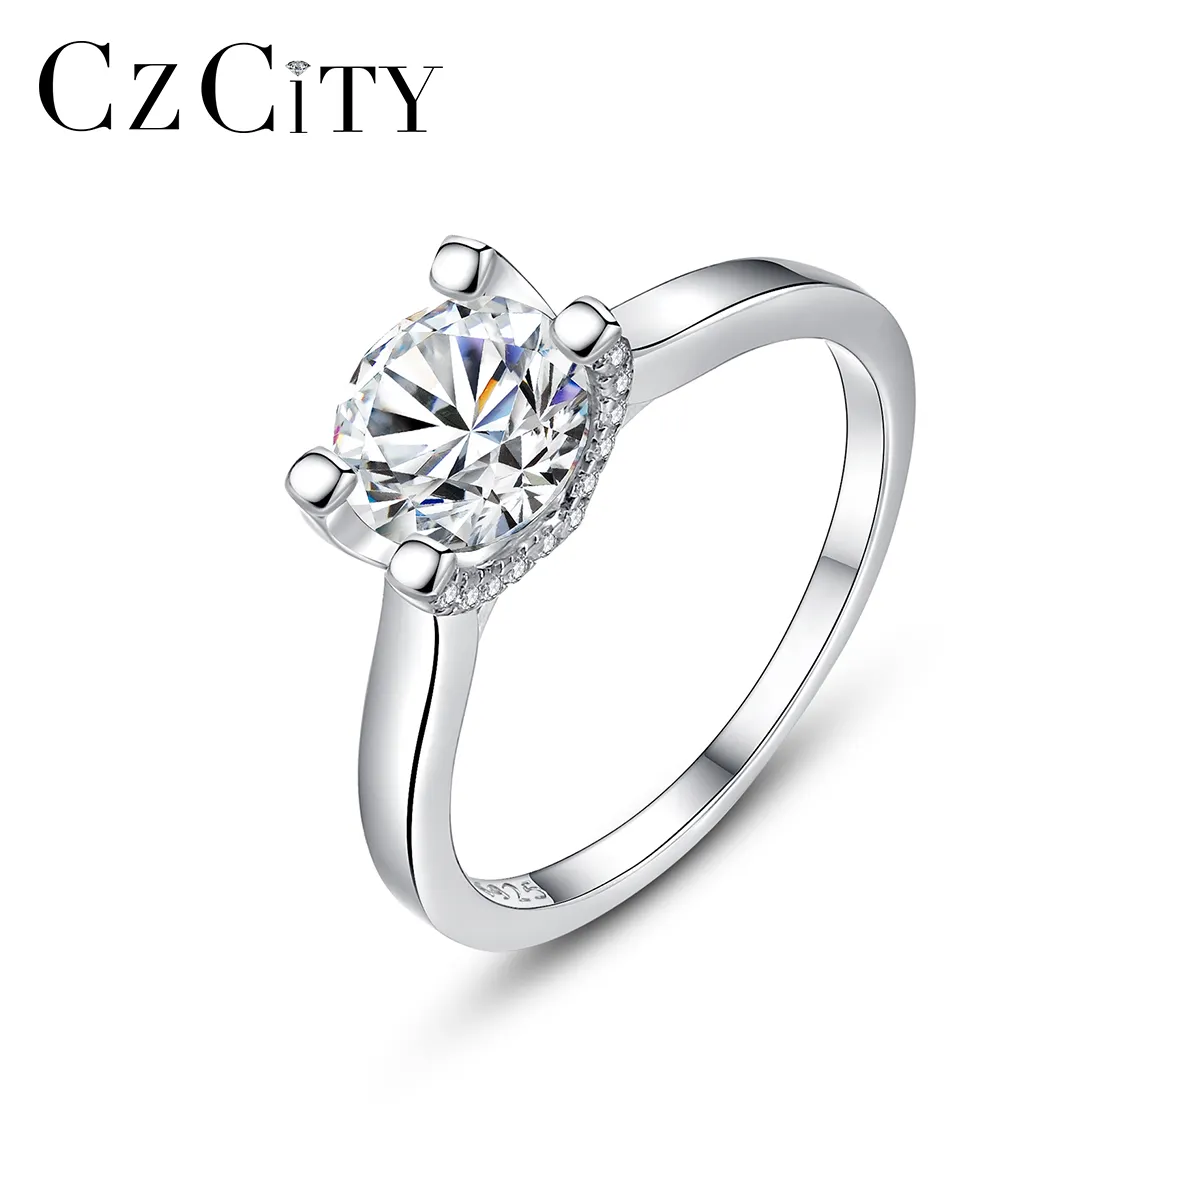 CZCITY Classic Style Engagement Wedding Real Silver Sterling Vintage Finger Silver Moissanite Ring